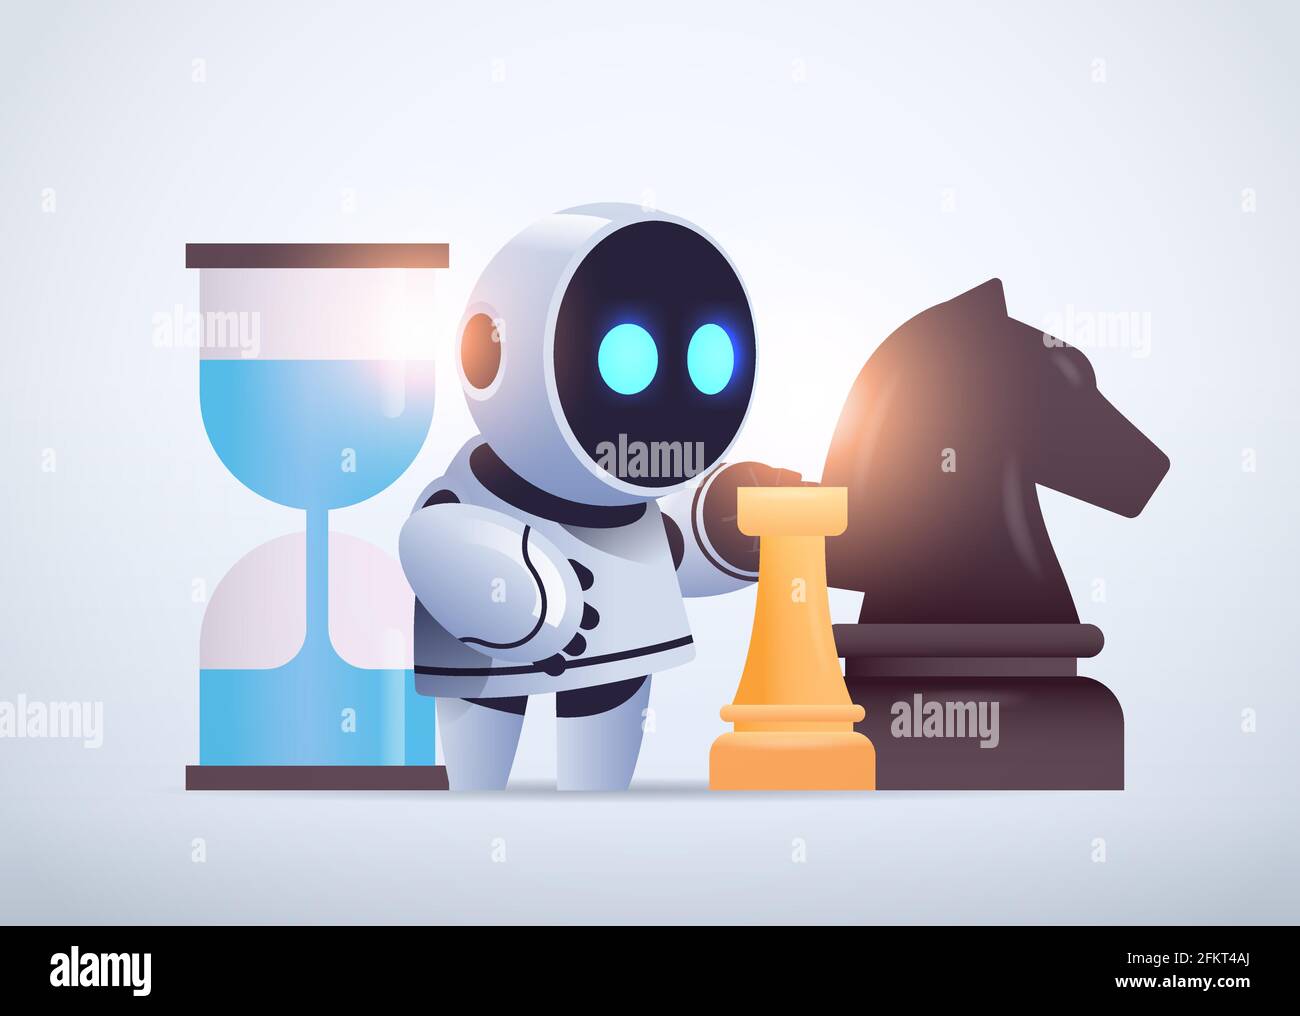 2,343 Robot Chess Images, Stock Photos, 3D objects, & Vectors